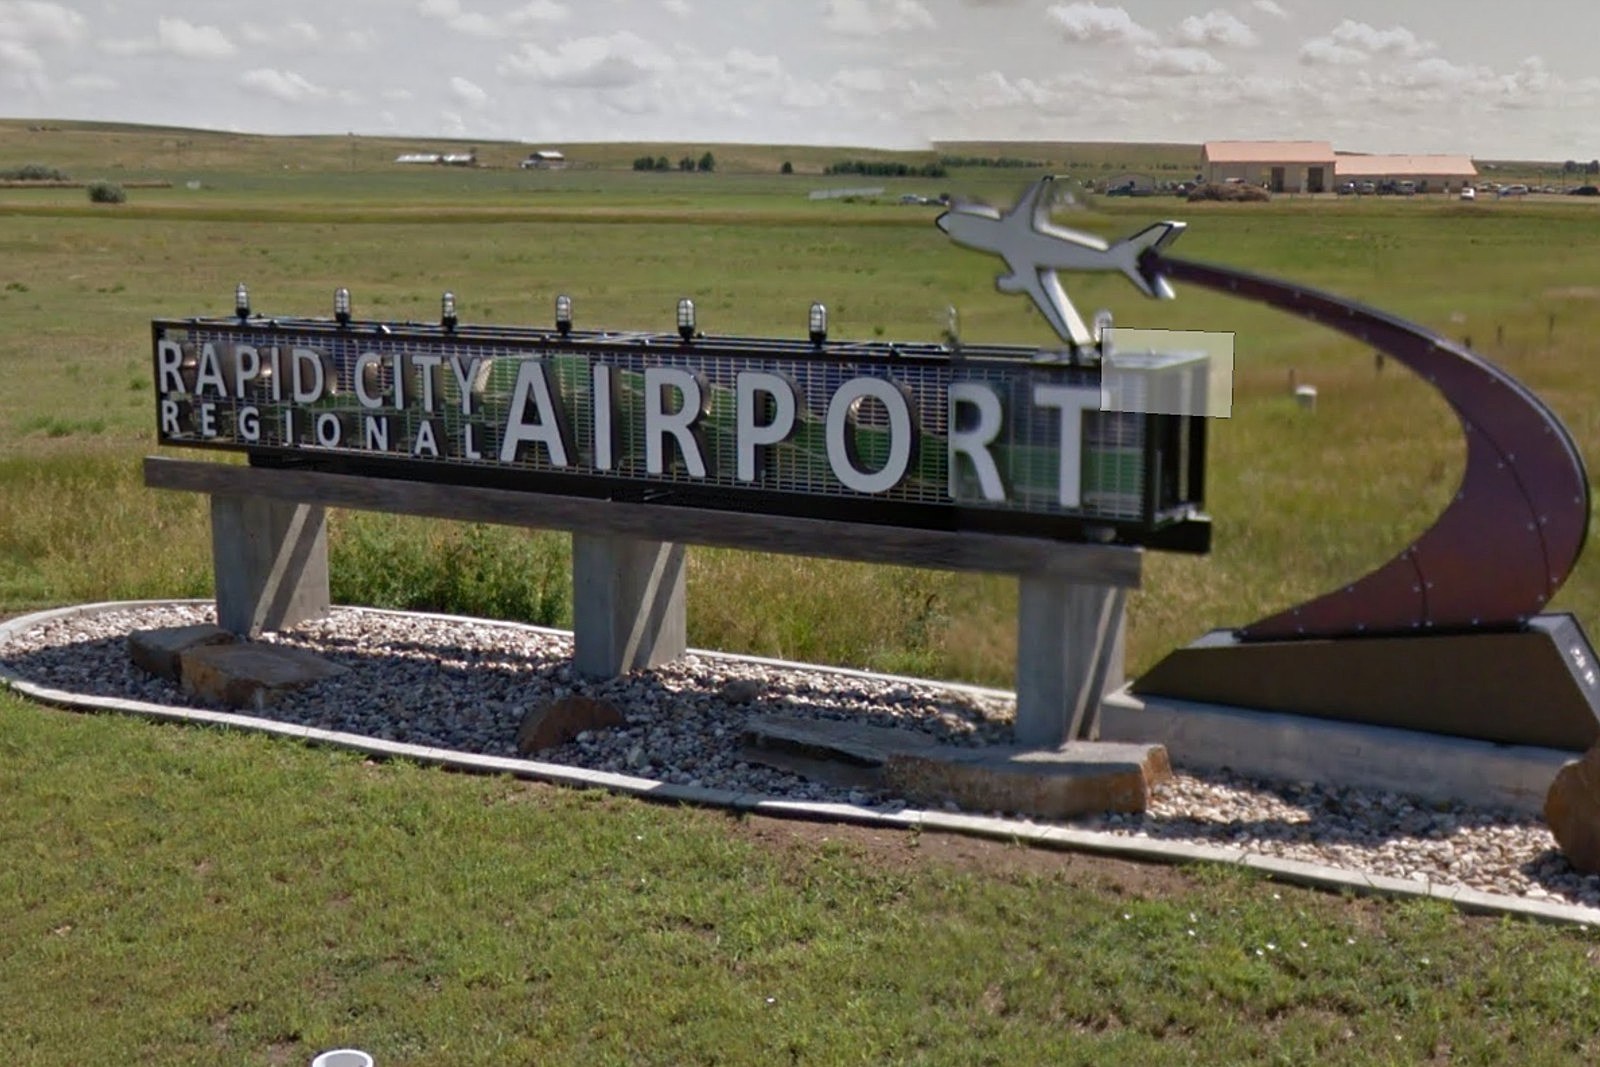 how many fly in and out of the rapid city regional airport per year